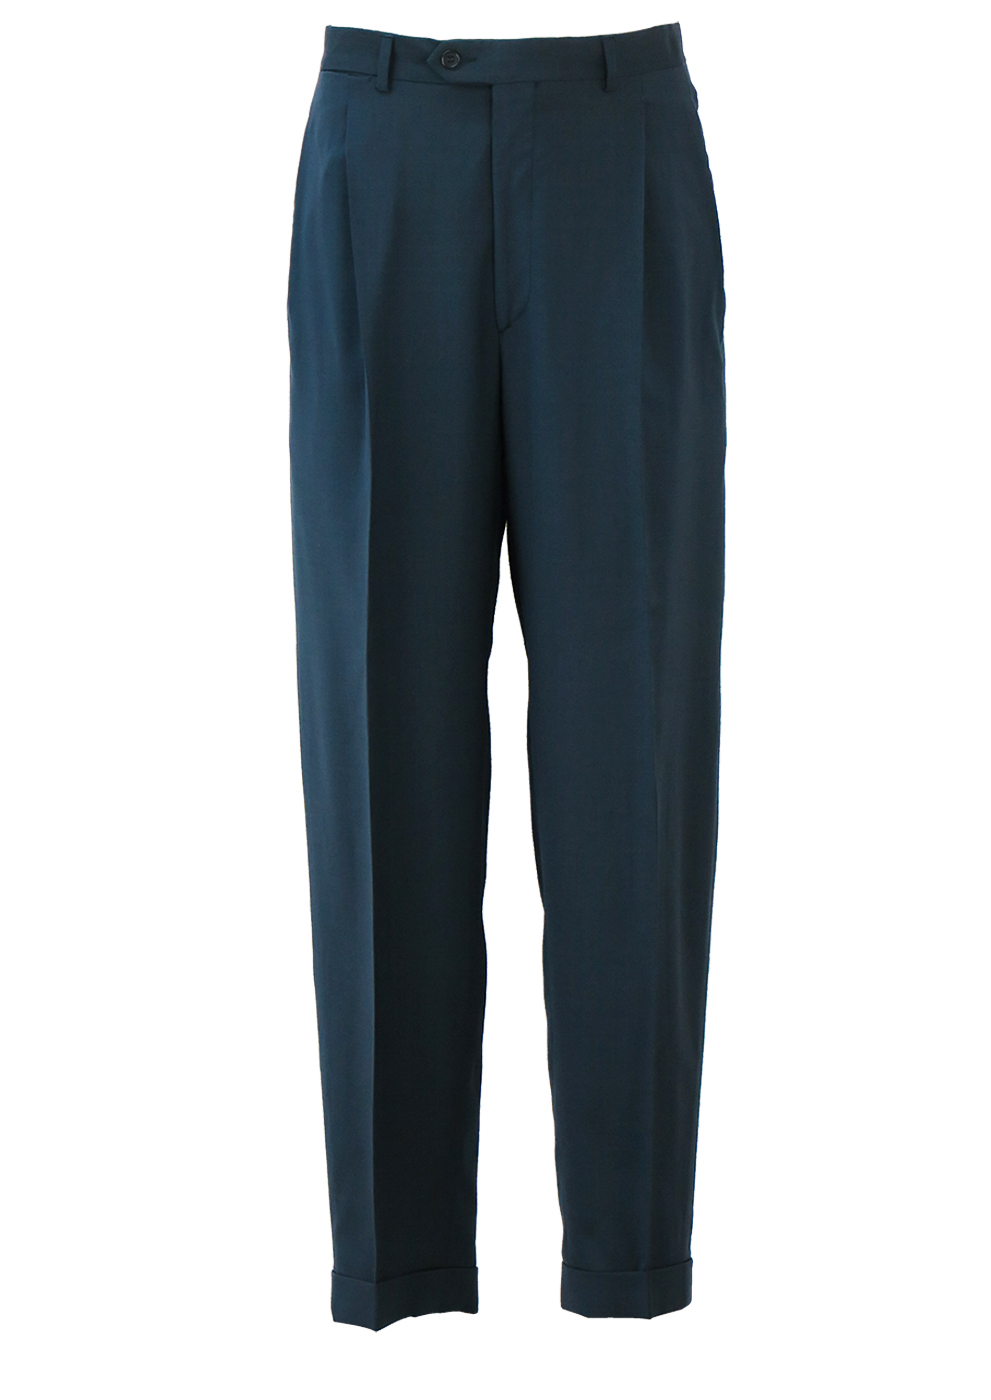 Dark Blue Pleat Front Tailored Trousers with a Fine Check Pattern - 31 ...